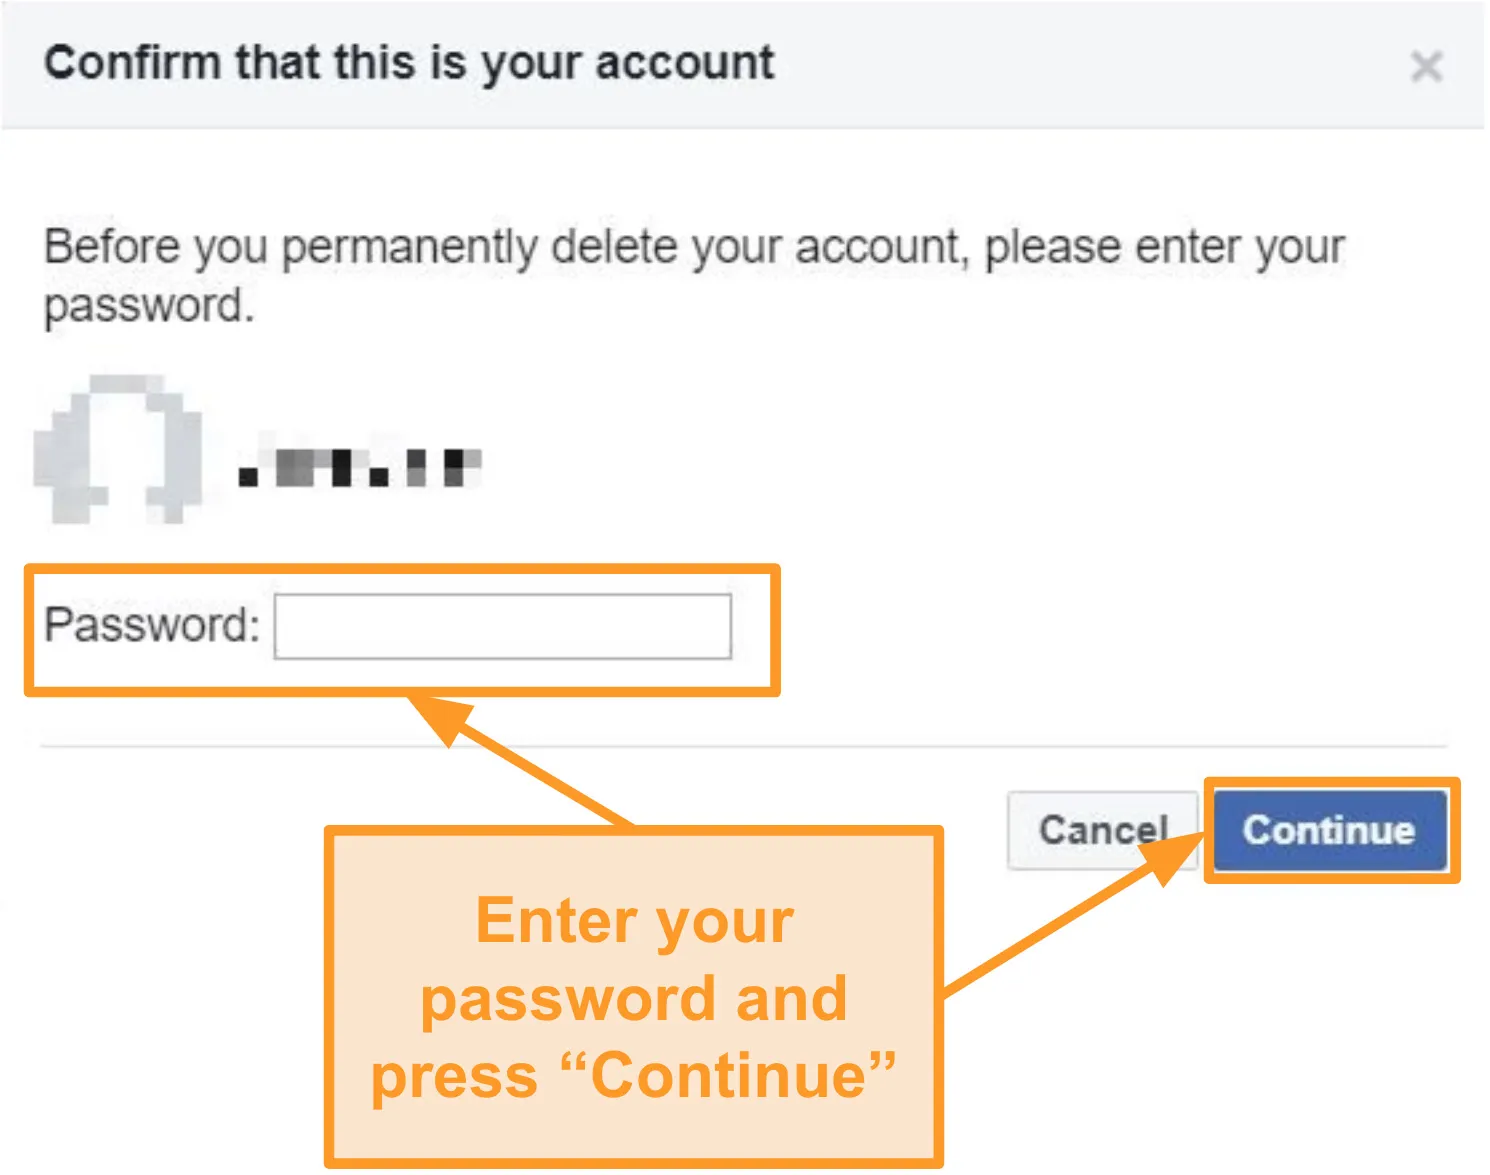 Screenshot of entering password to confirm account deletion